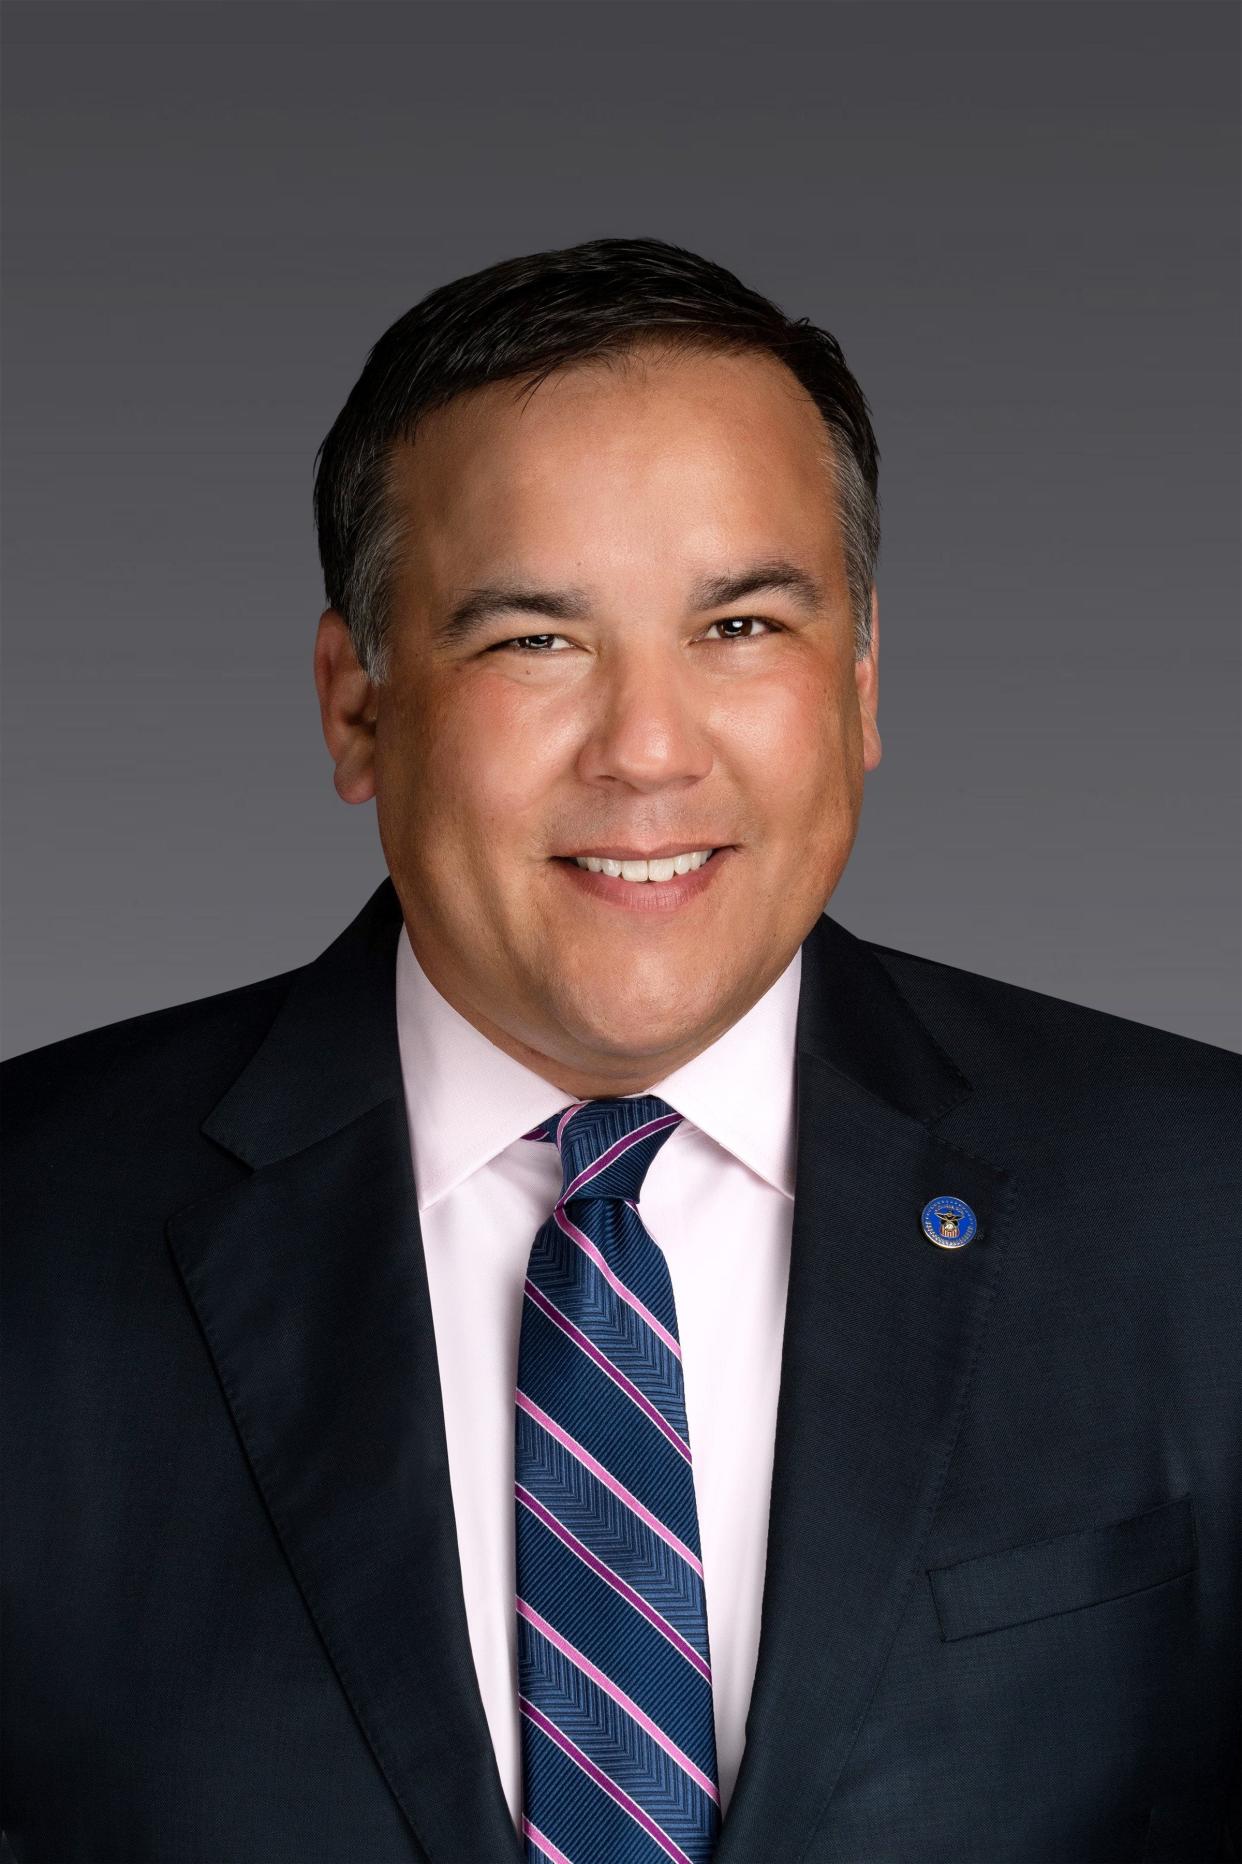 Andrew J. Ginther is the mayor of the city of Columbus.